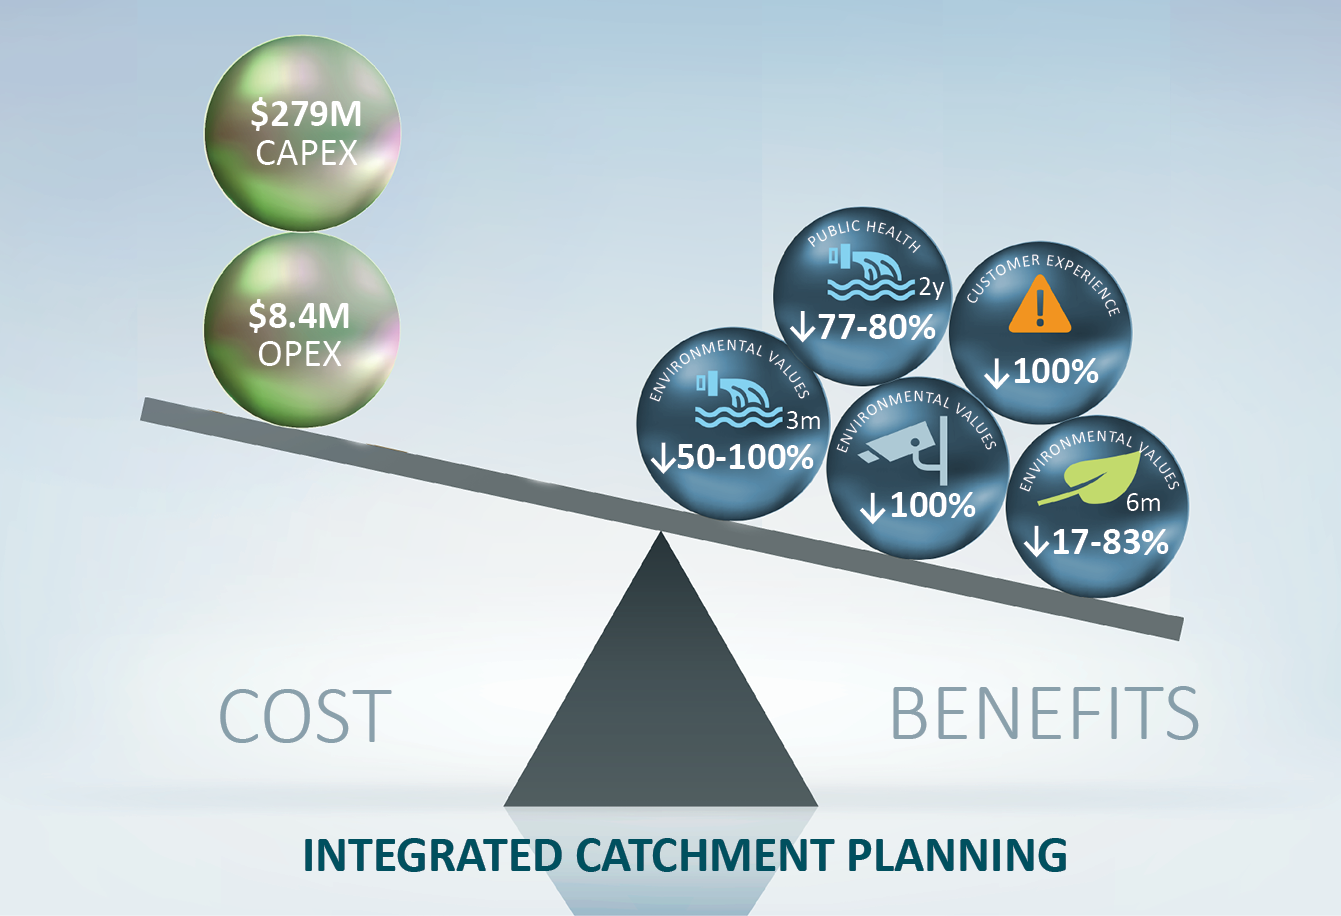 Integrated catchment planning approach vs. traditional planning approach